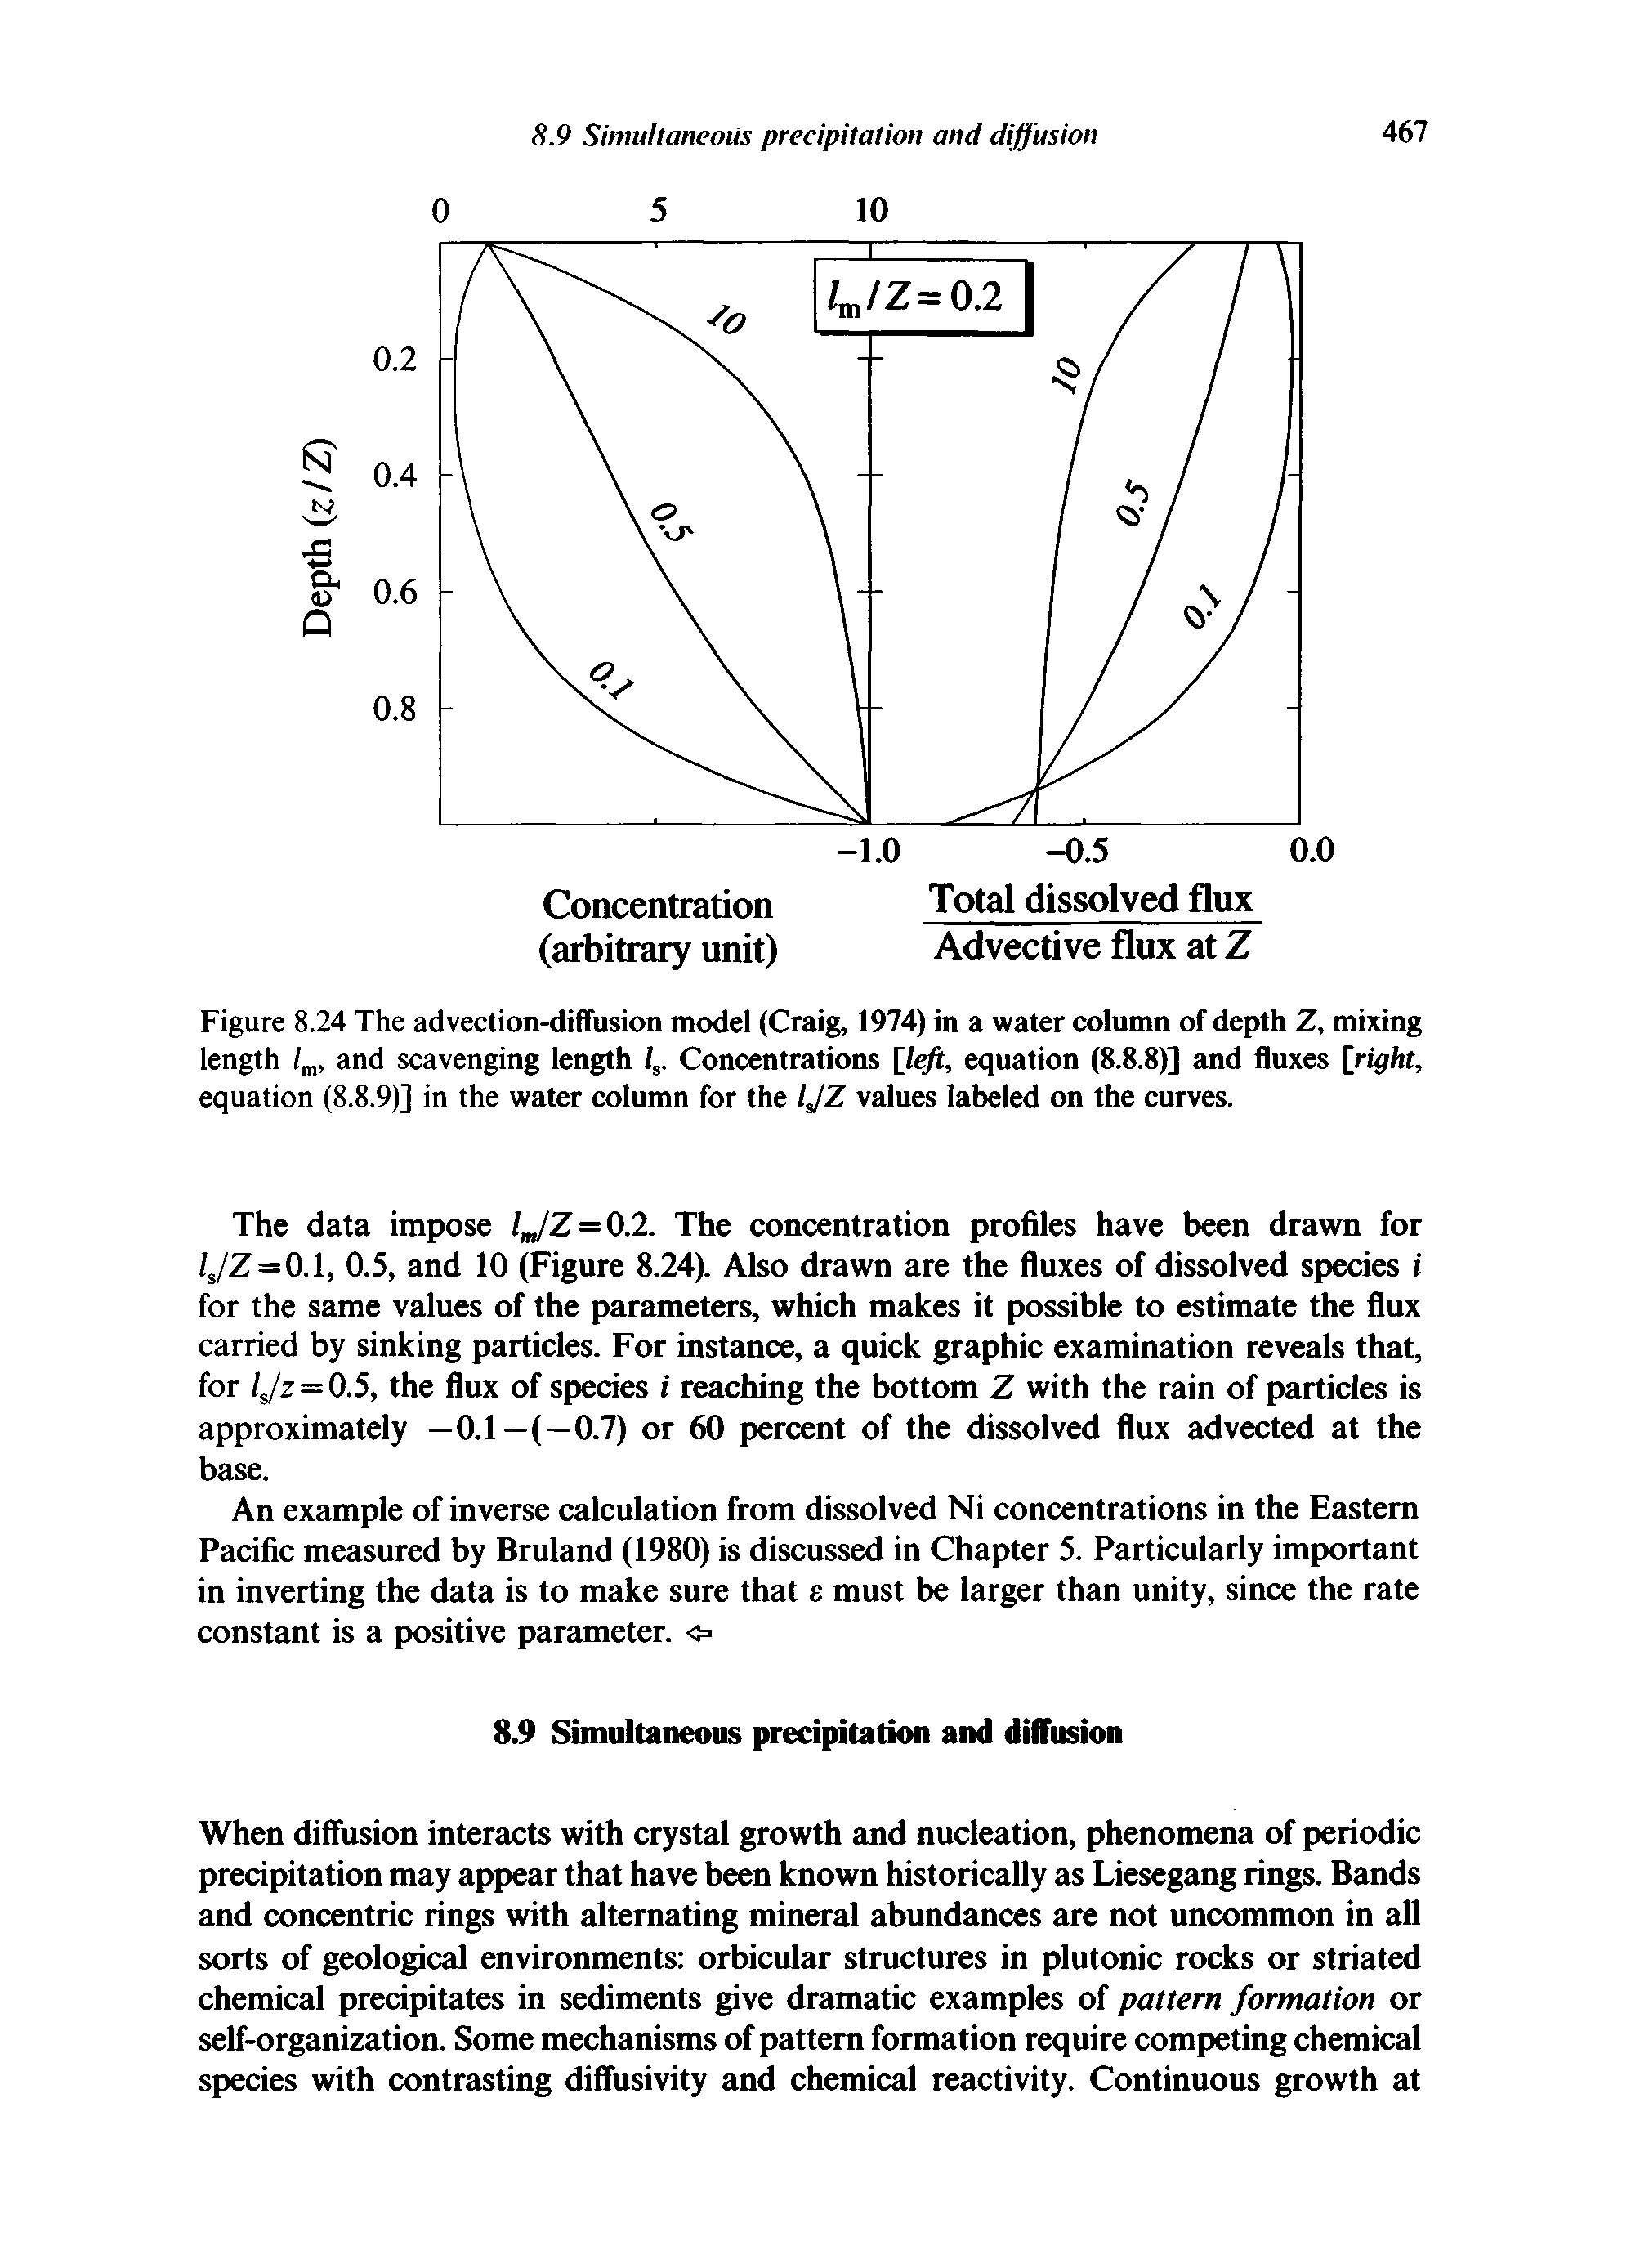 Figure 8.24 The advection-diffusion model (Craig, 1974) in a water column of depth Z, mixing length lm, and scavenging length /s. Concentrations [left, equation (8.8.8)] and fluxes [right, equation (8.8.9)] in the water column for the IJZ values labeled on the curves.